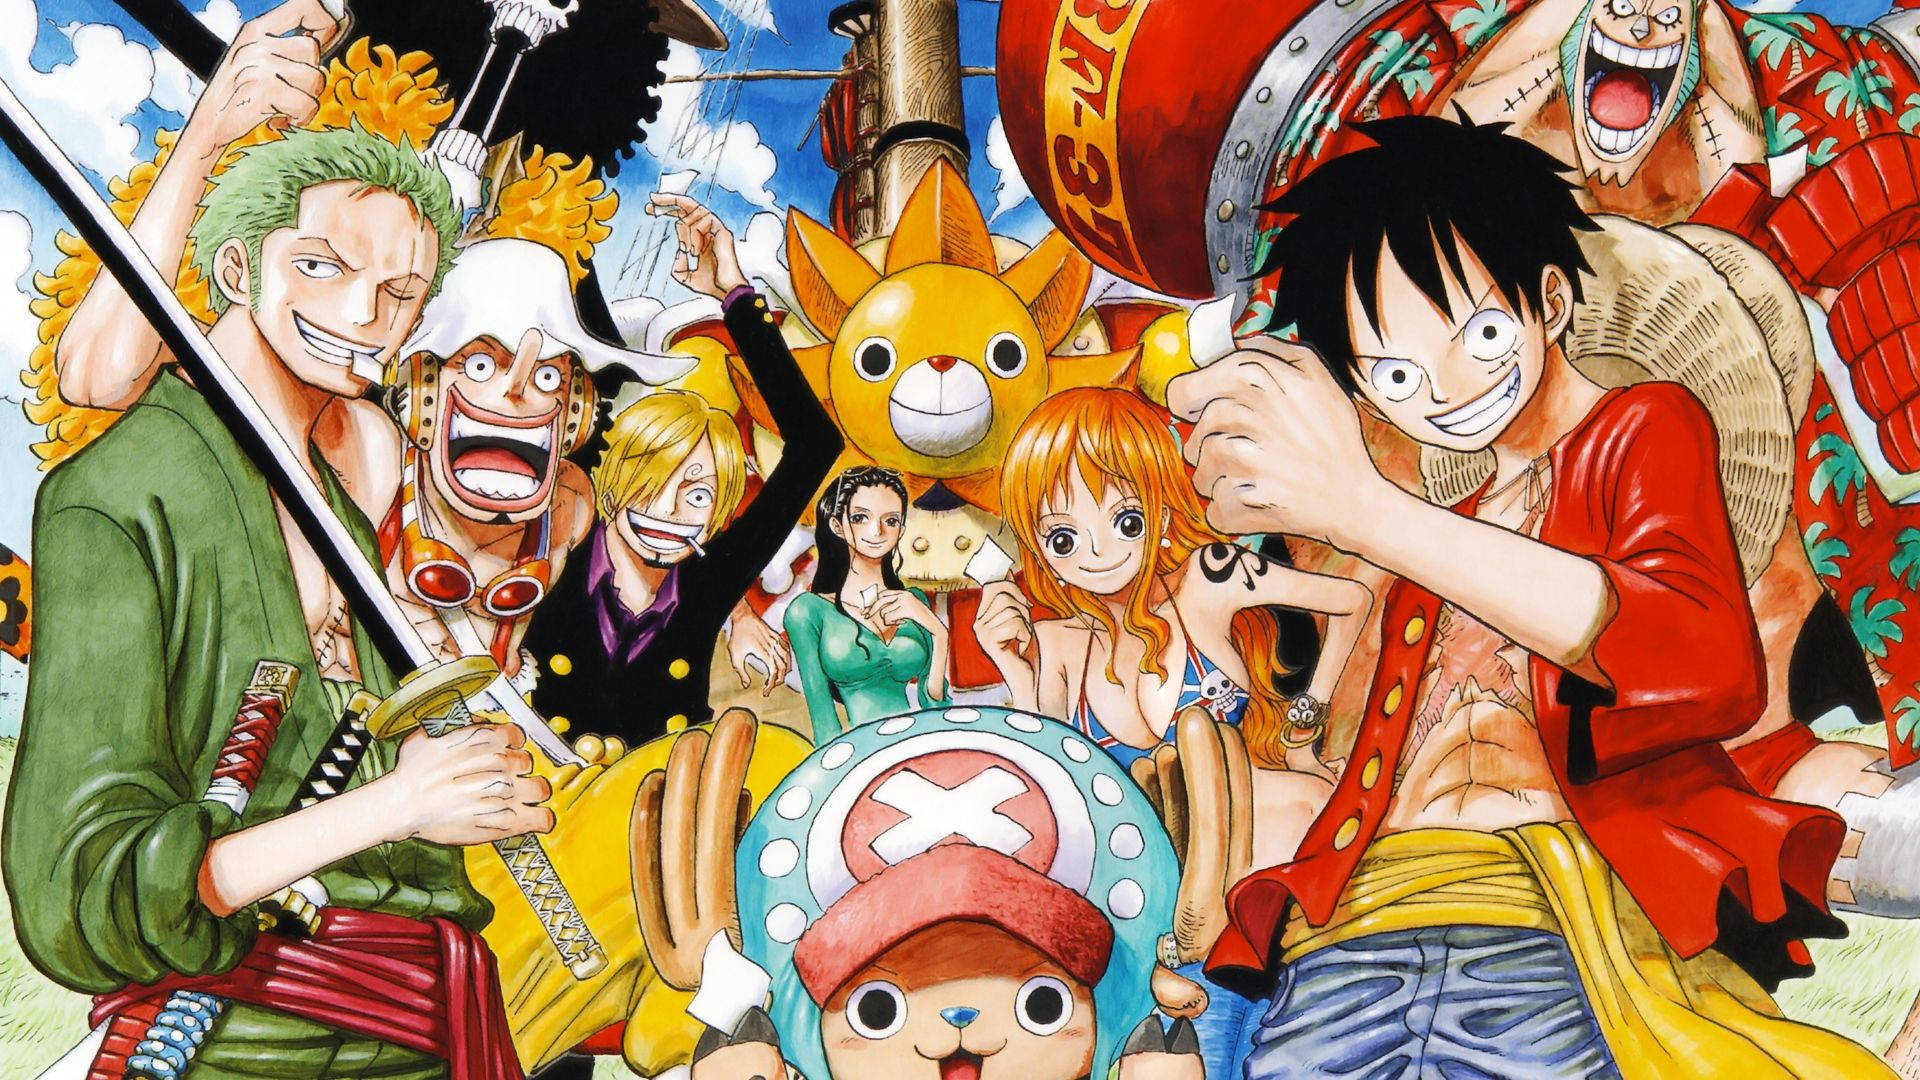 Classic One Piece references and Easter eggs abound in the Egghead